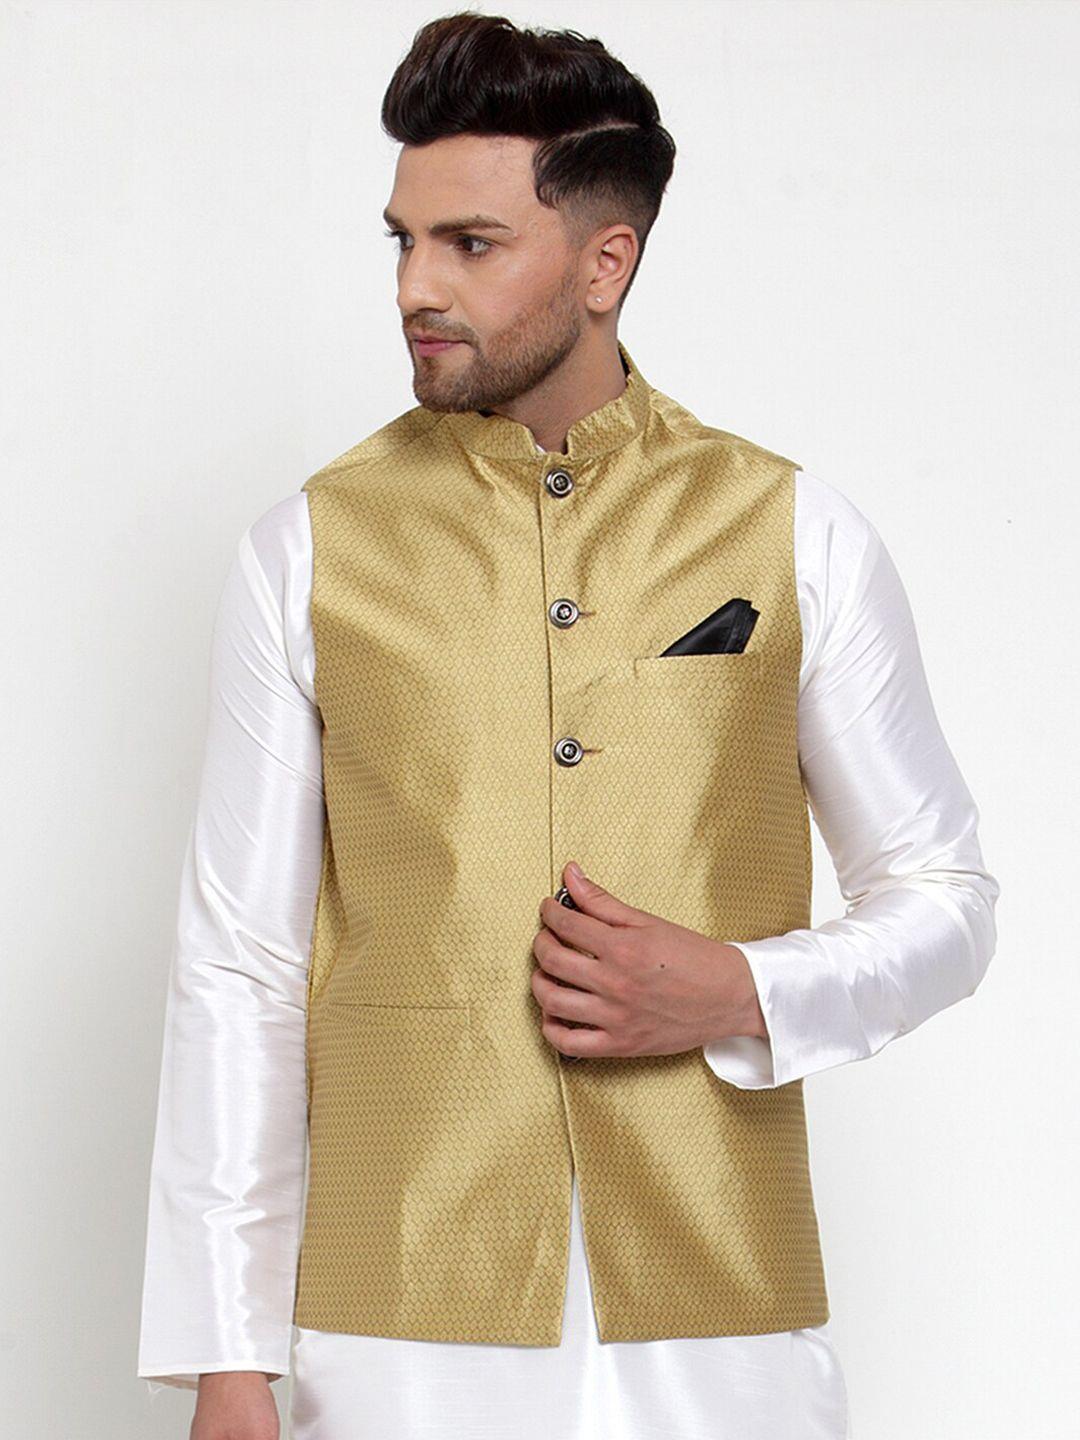 jompers men gold-toned woven design waistcoat with pocket sqaure